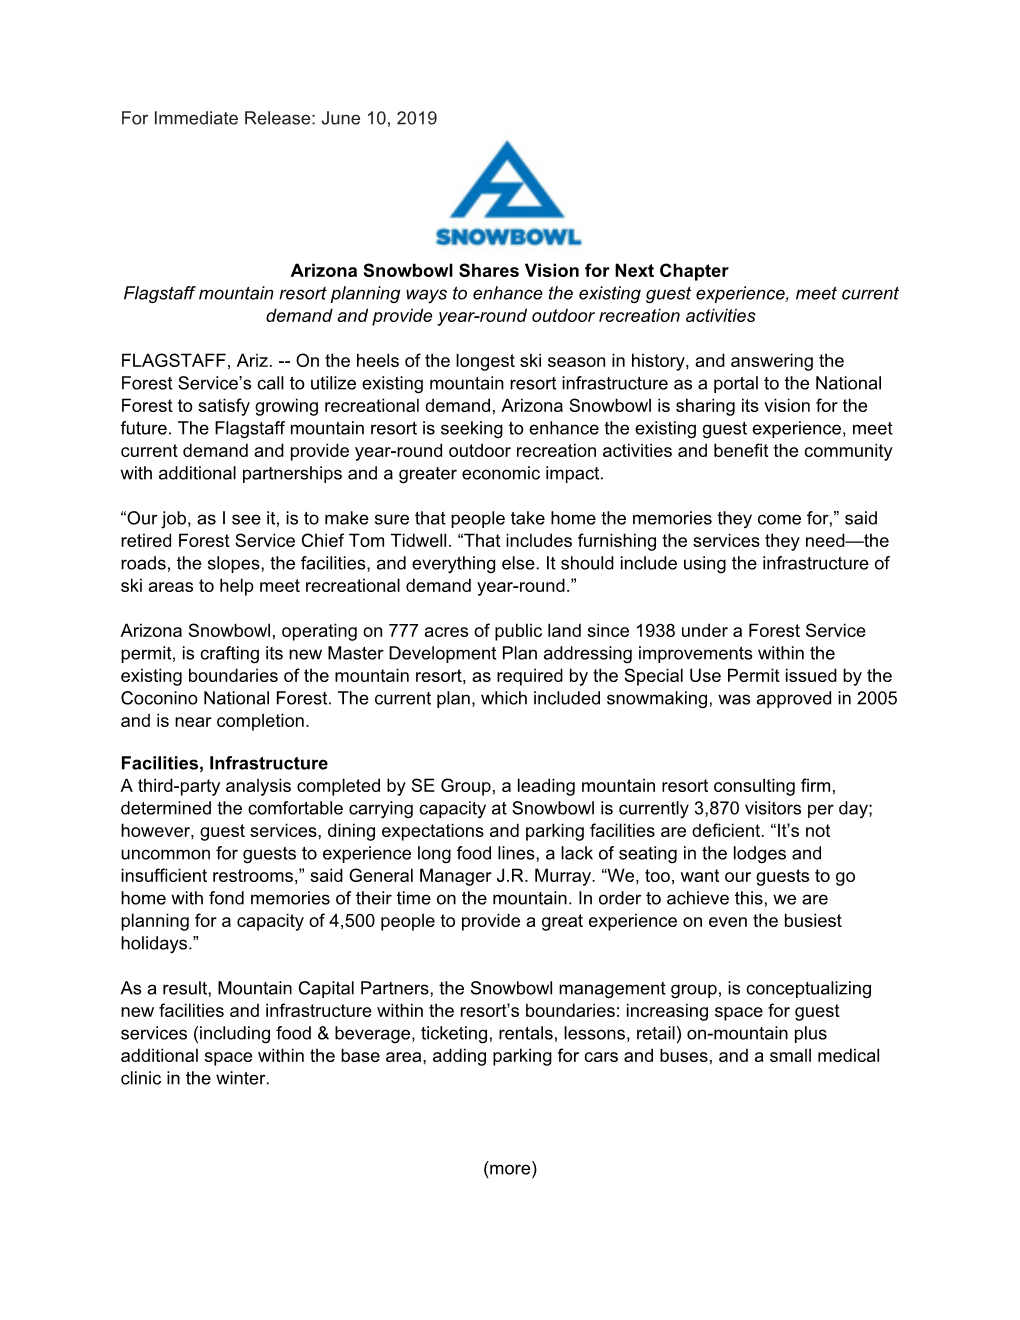 For Immediate Release: June 10, 2019 Arizona Snowbowl Shares Vision for Next Chapter Flagstaff Mountain Resort Planning Ways To